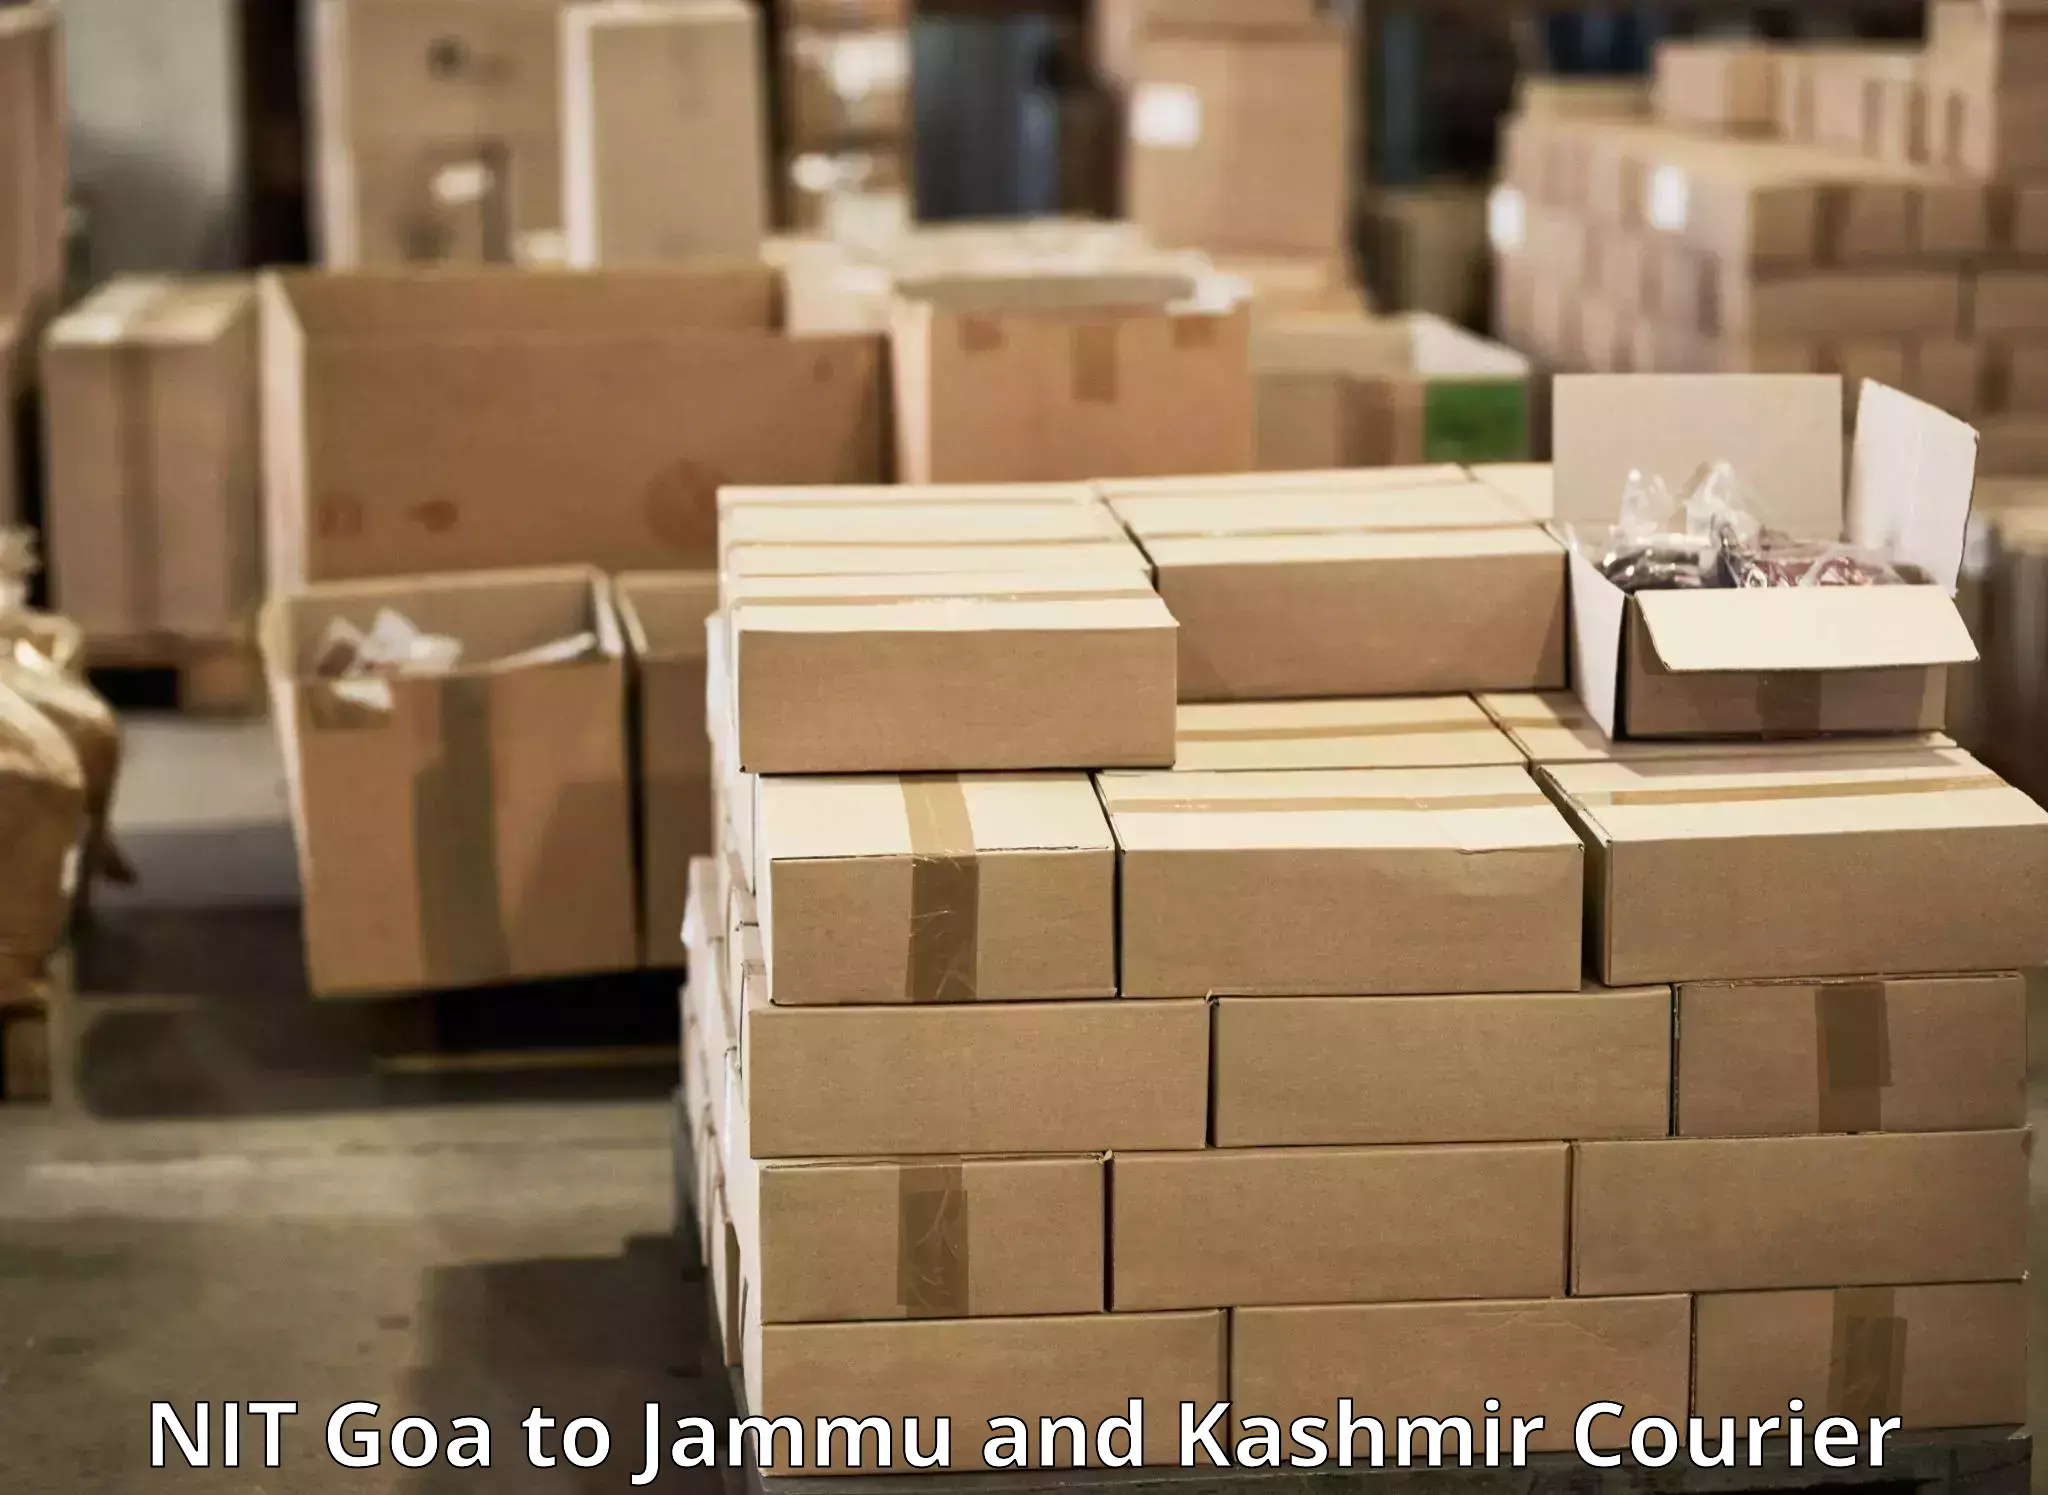 Subscription-based courier NIT Goa to Udhampur